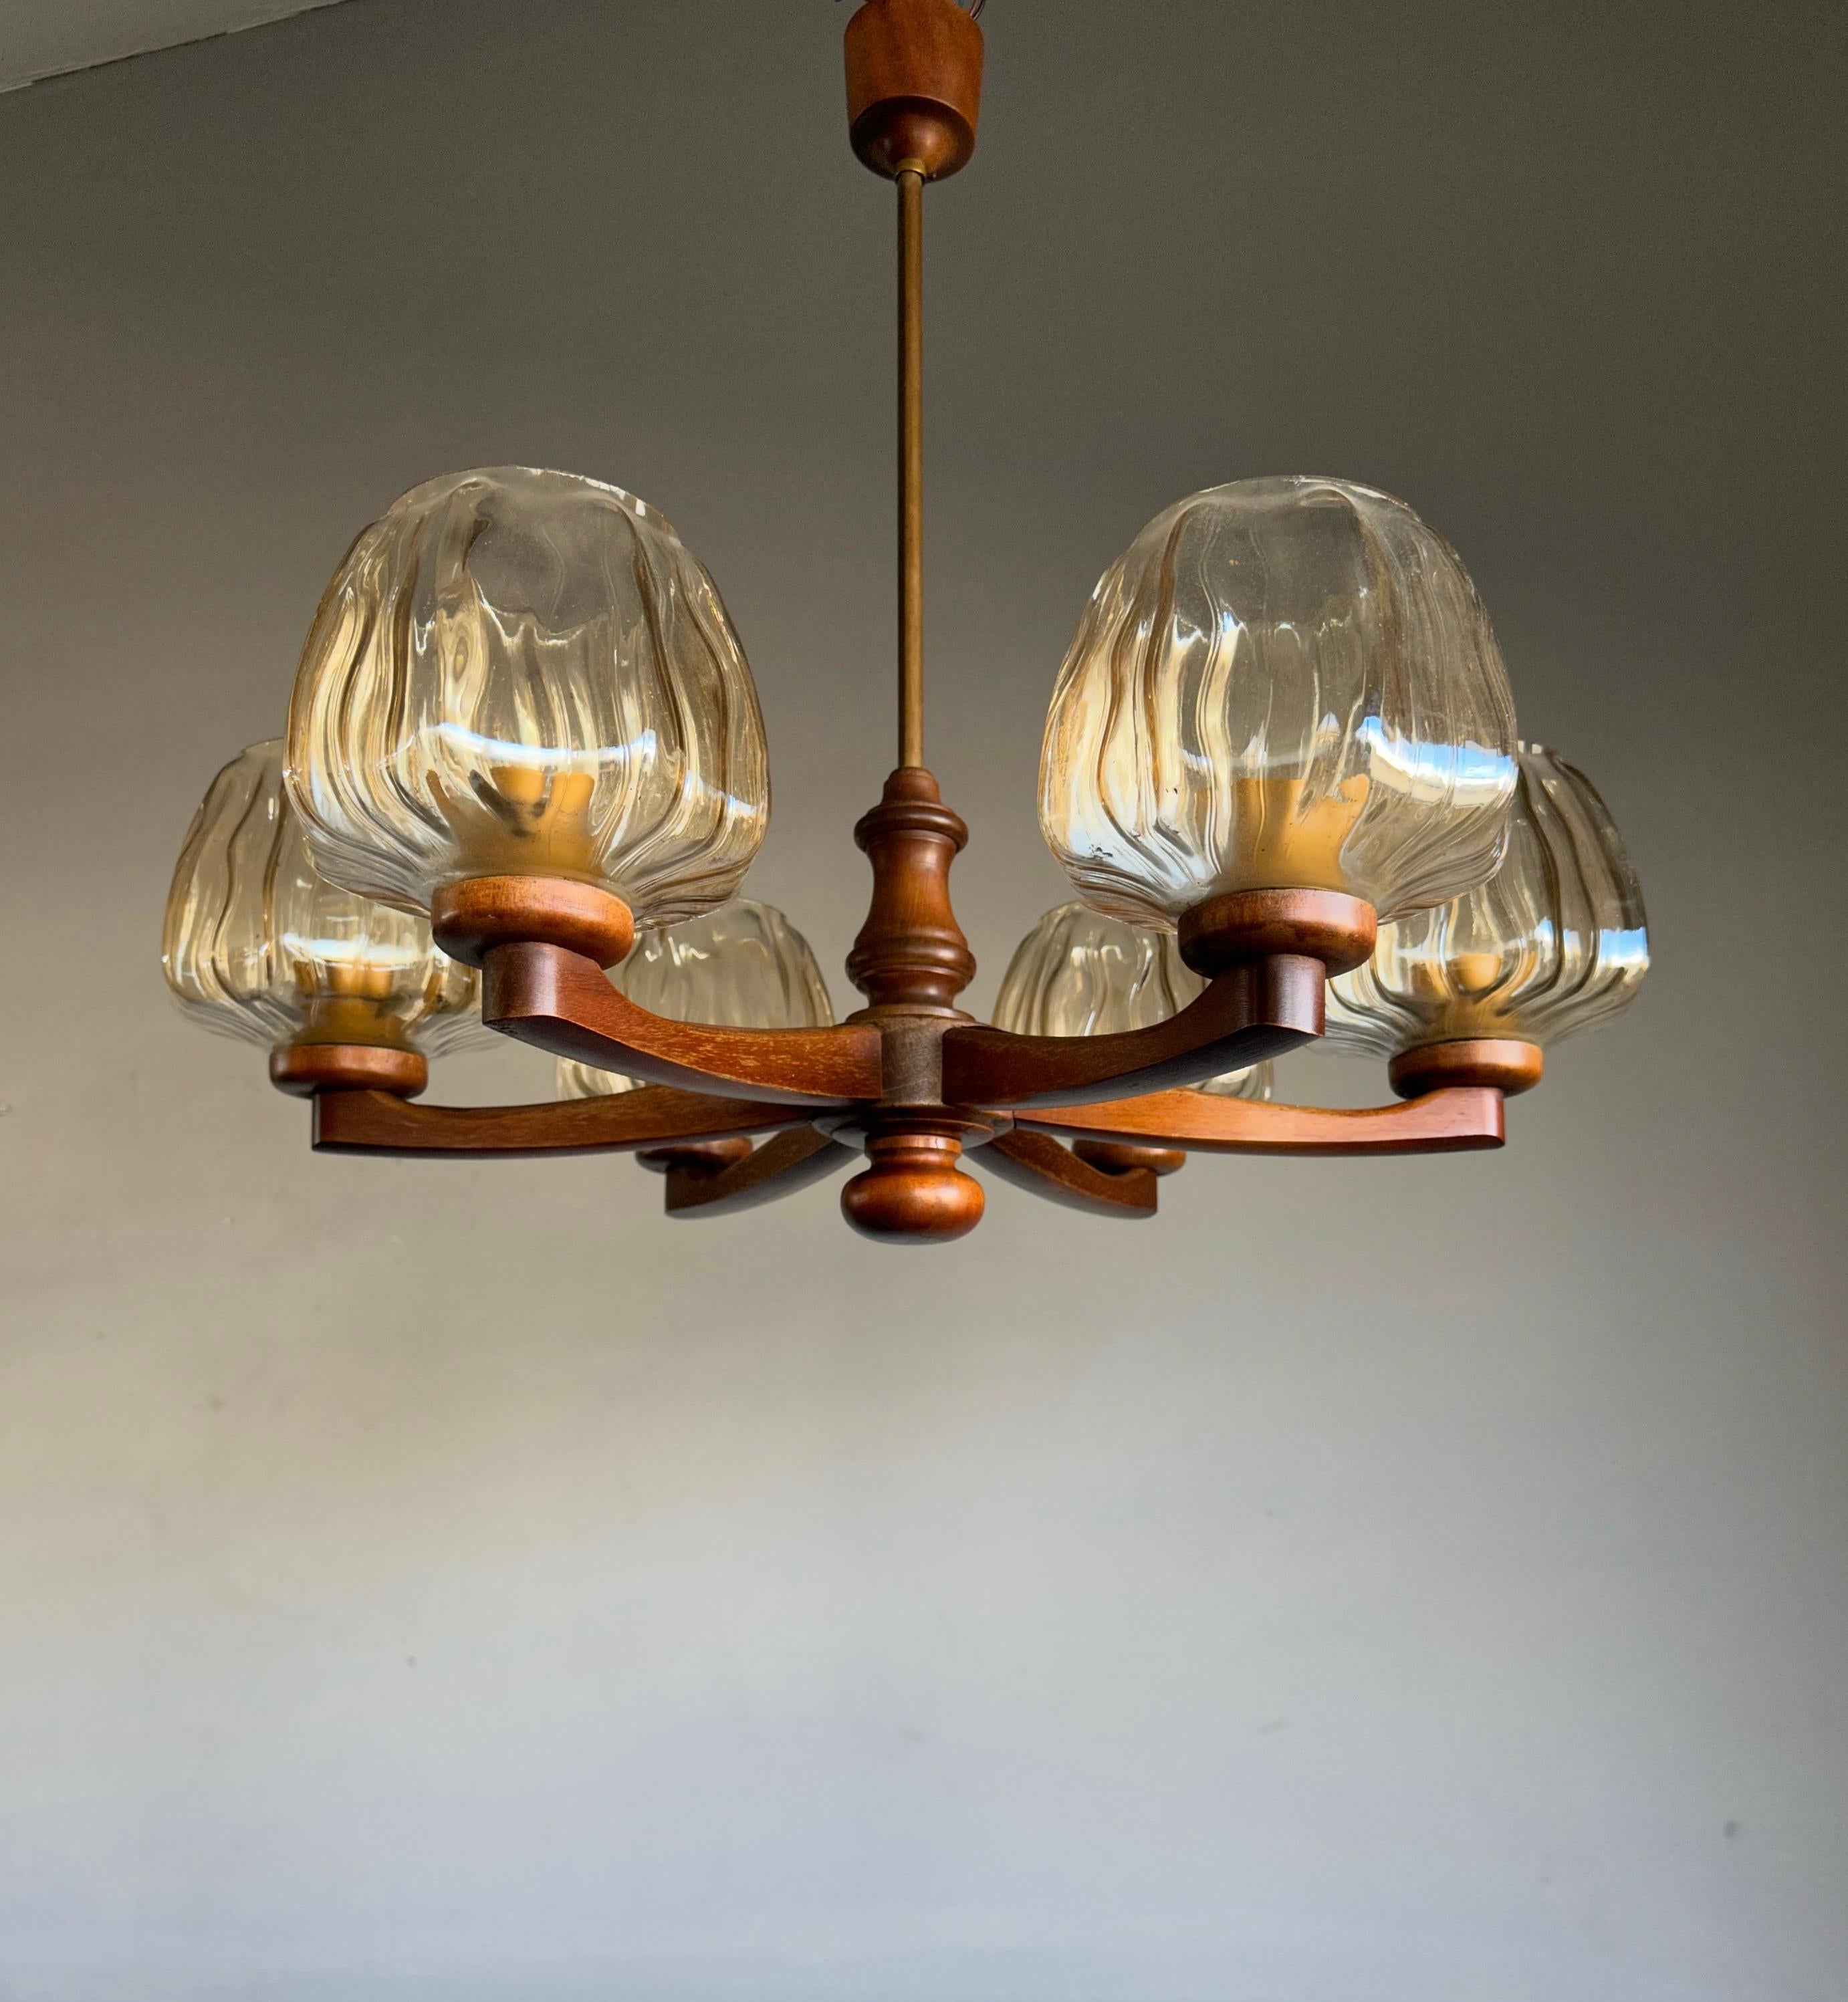 Beautiful and stylish pendant light from the heydays of the Scandinavian Design era. 

If you are looking for a rare and stylish chandelier to complement your midcentury or your contemporary interior then this handcrafted Scandinavian light